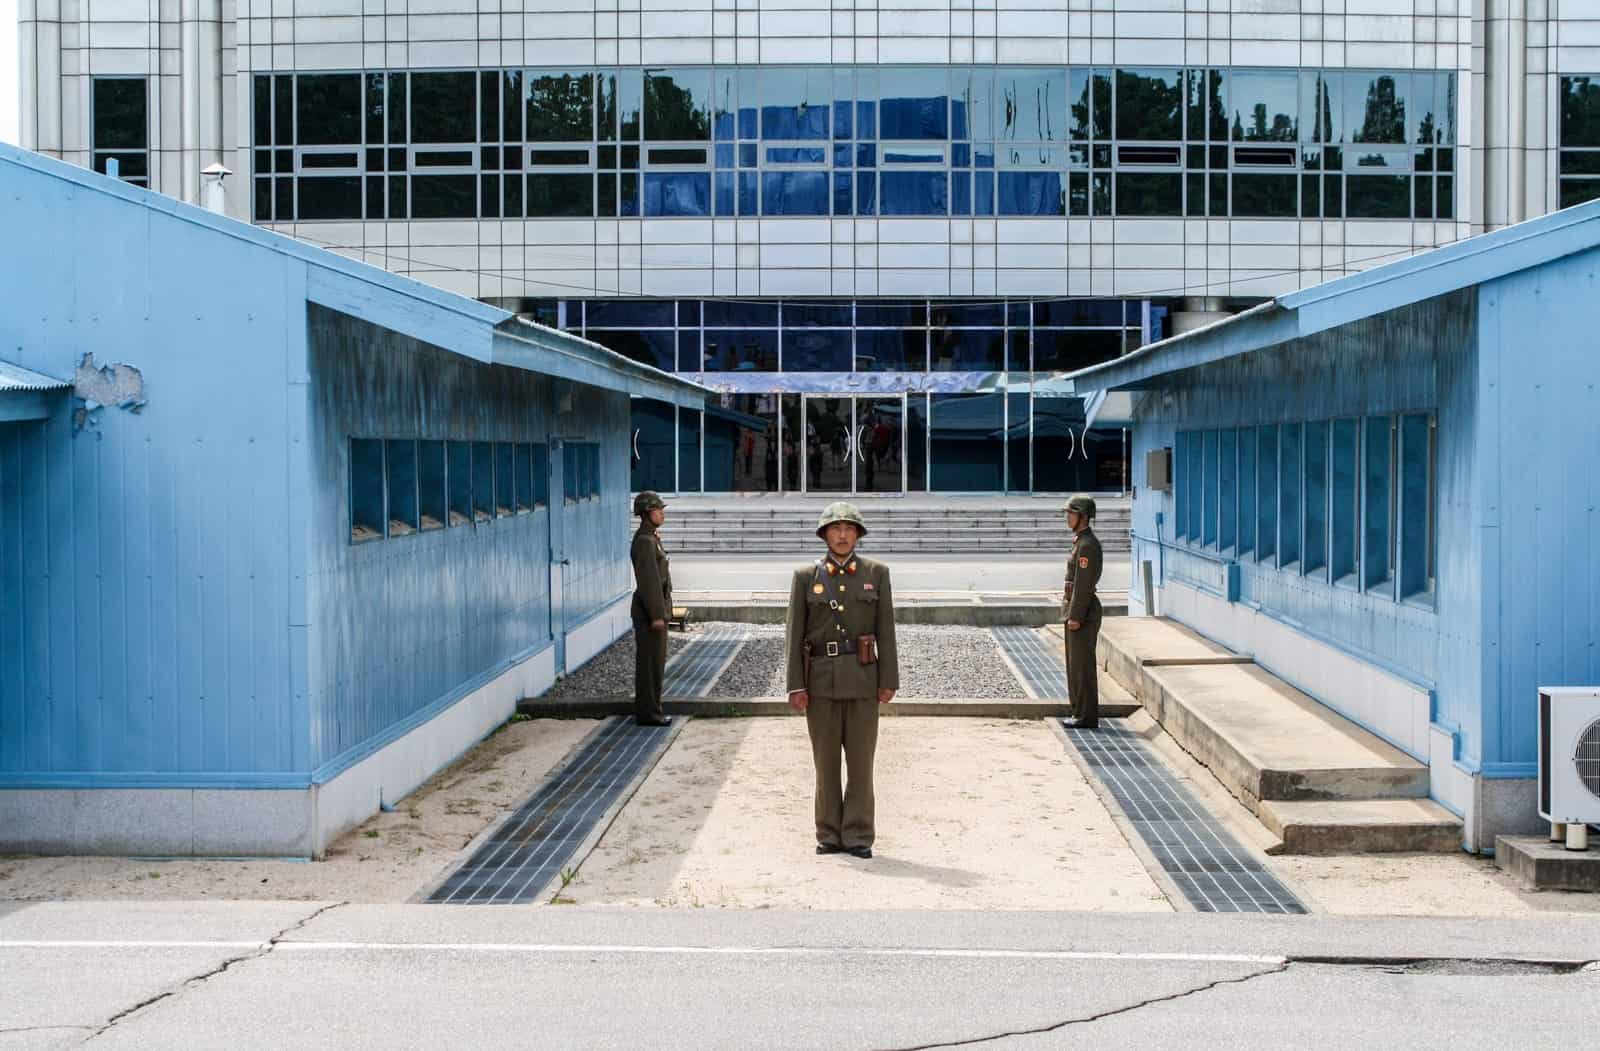 North Korean guards on the border when you visit the DMZ in North Korea